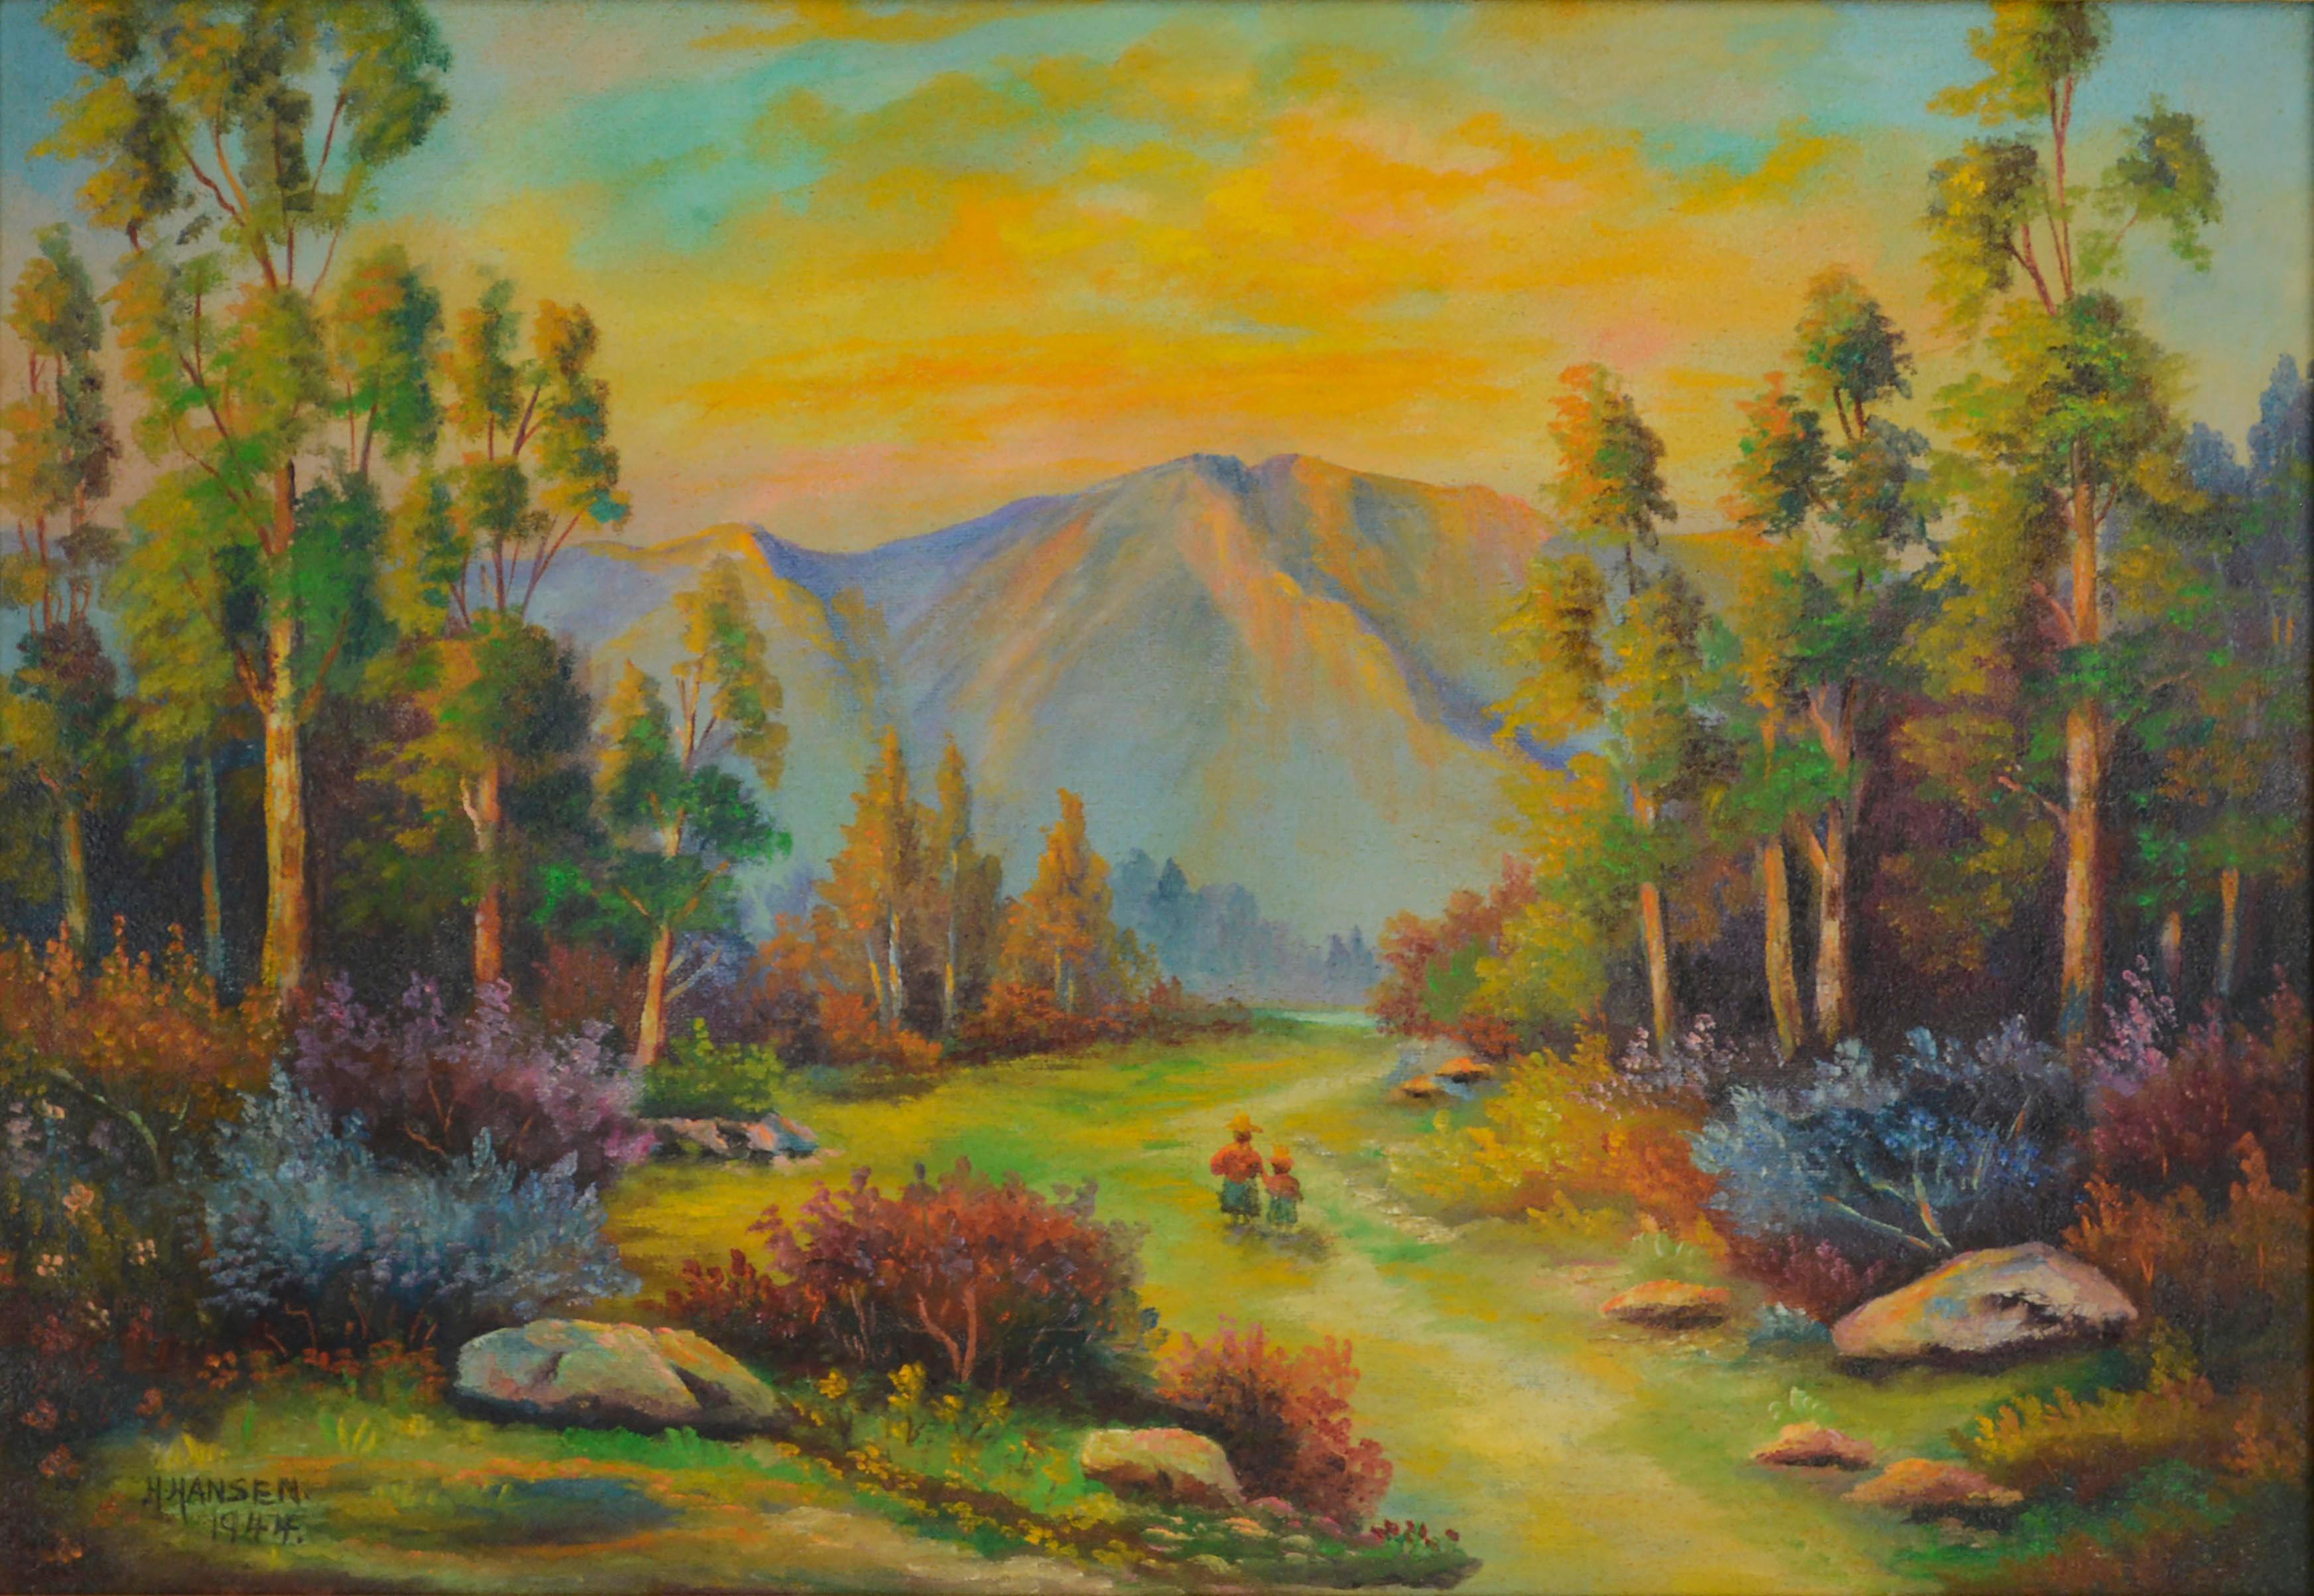 1940's San Ynez Valley Indian Trail Sunset - Painting by H. Hansen